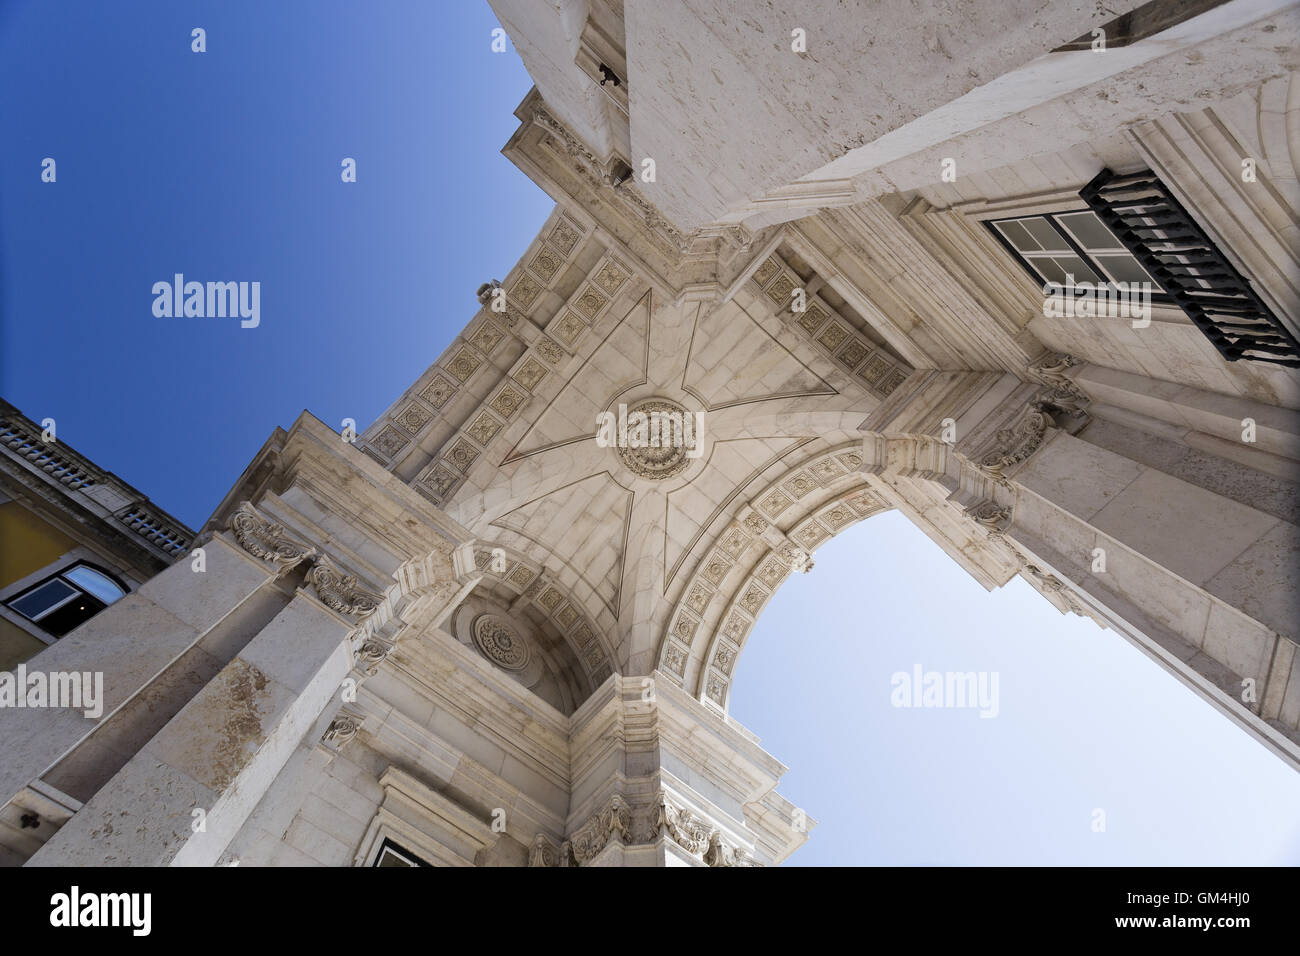 Upwards view of the Rua Augusta Arch, a stone triumphal arch-like historical building and main attraction on the Praca do Comerc Stock Photo